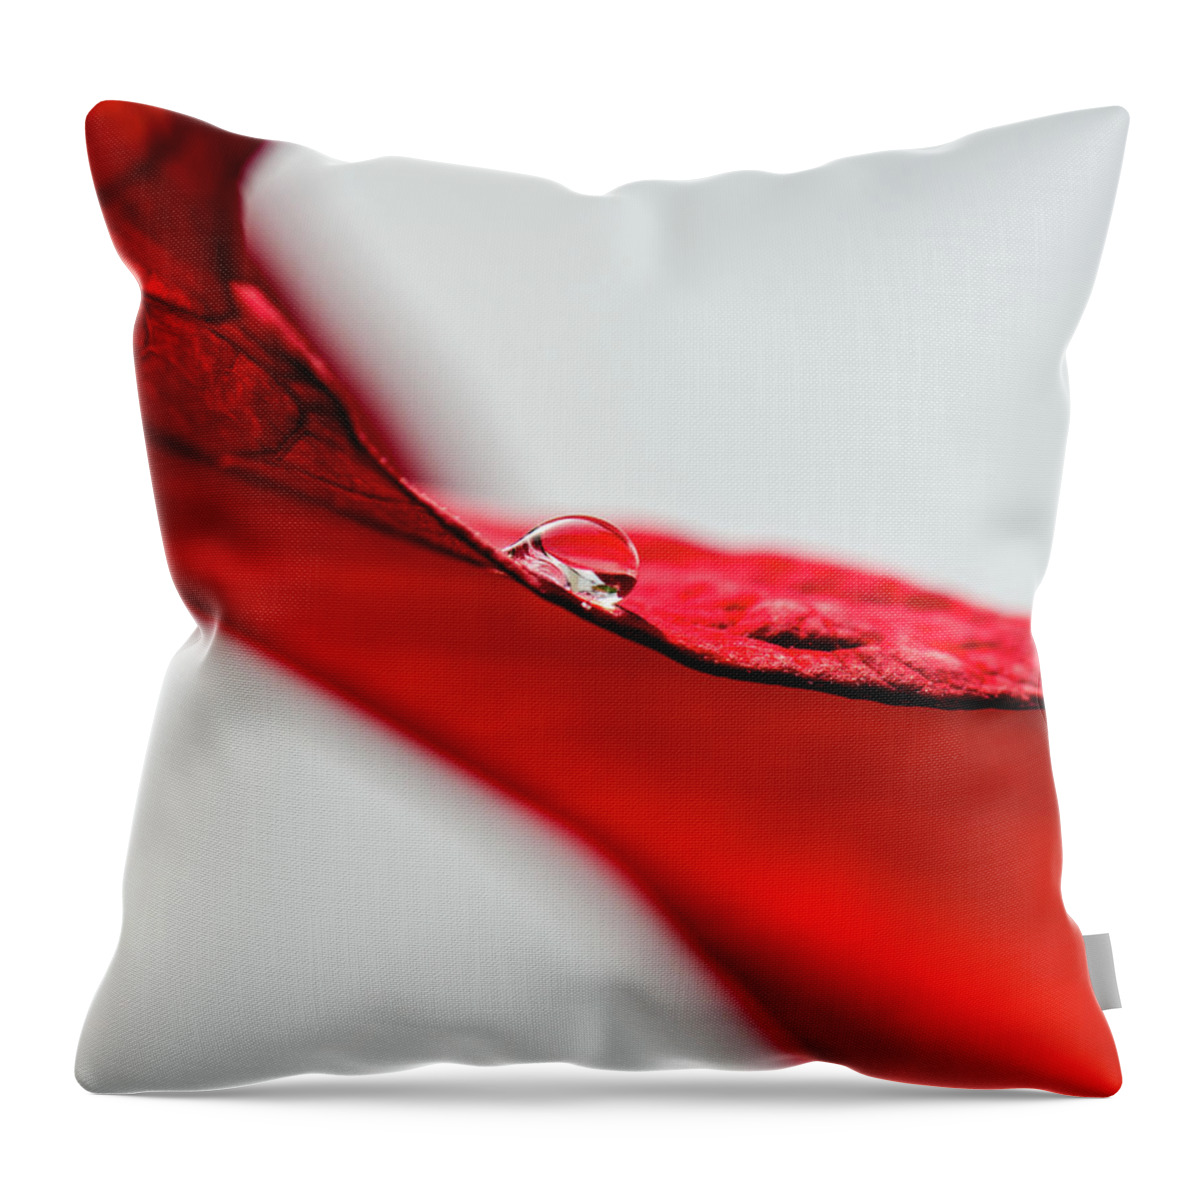 Scenics Throw Pillow featuring the photograph Water Drop On Red Leaf by Nancybelle Gonzaga Villarroya